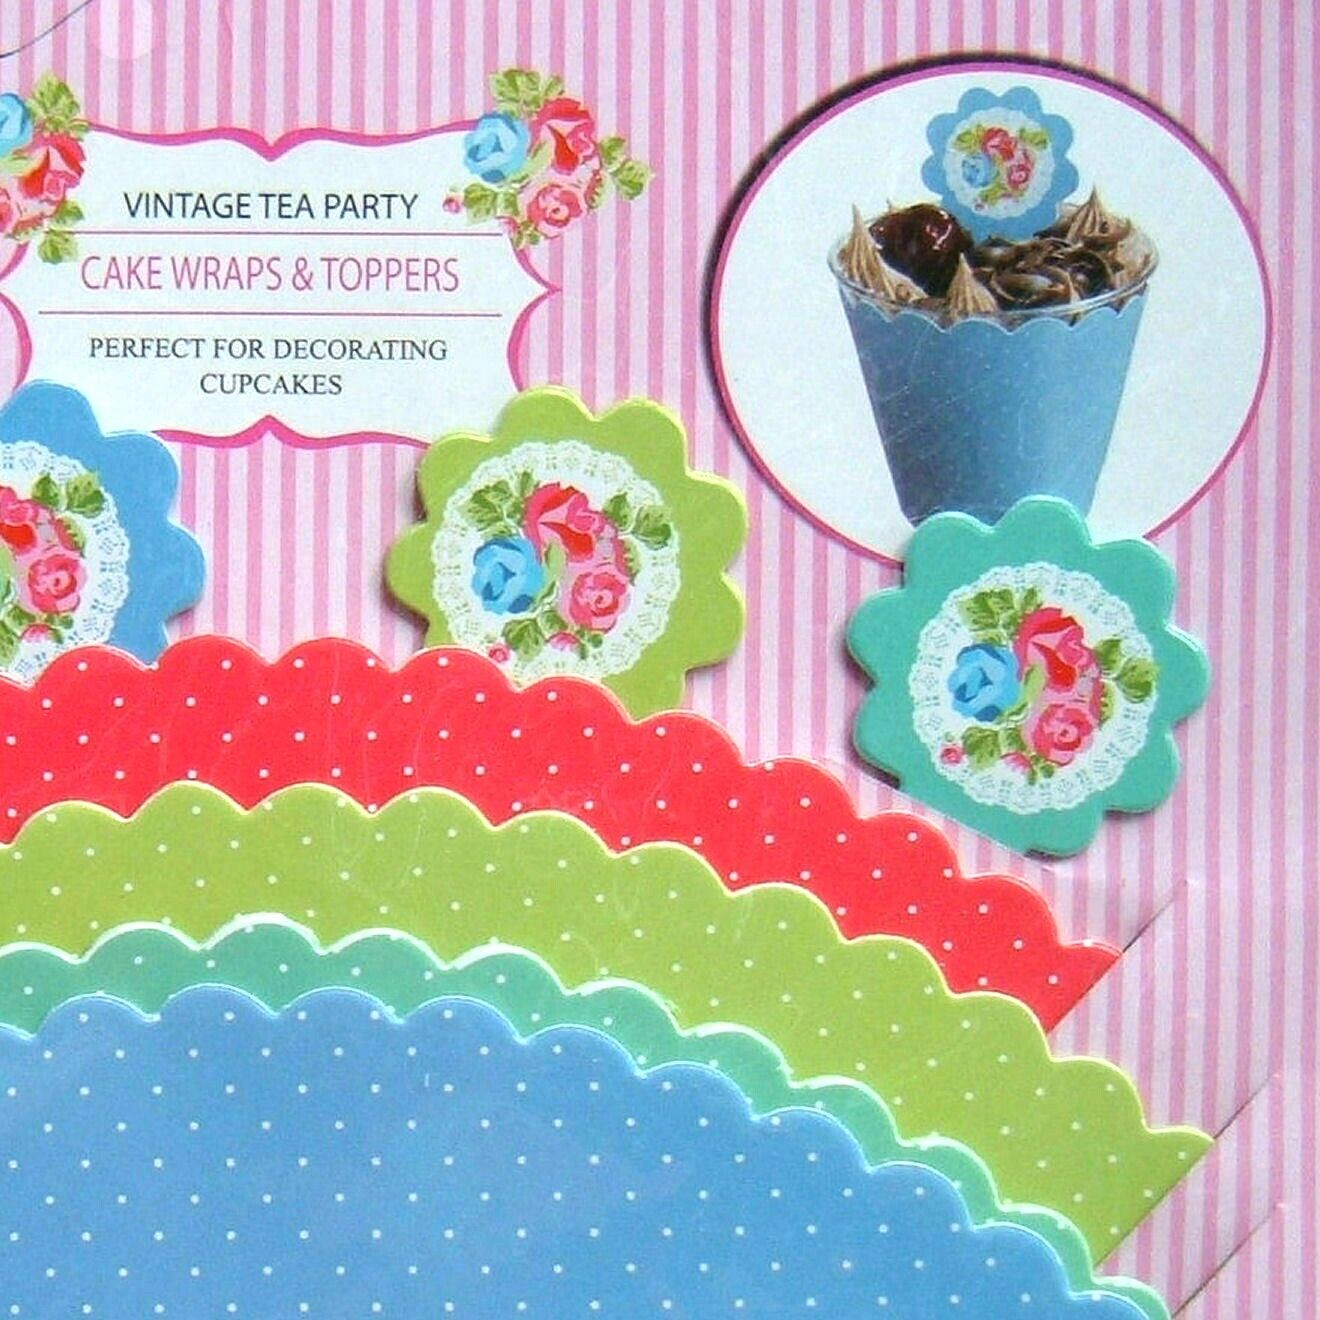 Beclen Harp 24 x Easter Vintage Tea Party Cup Cake Wraps With Floral Toppers Decoration